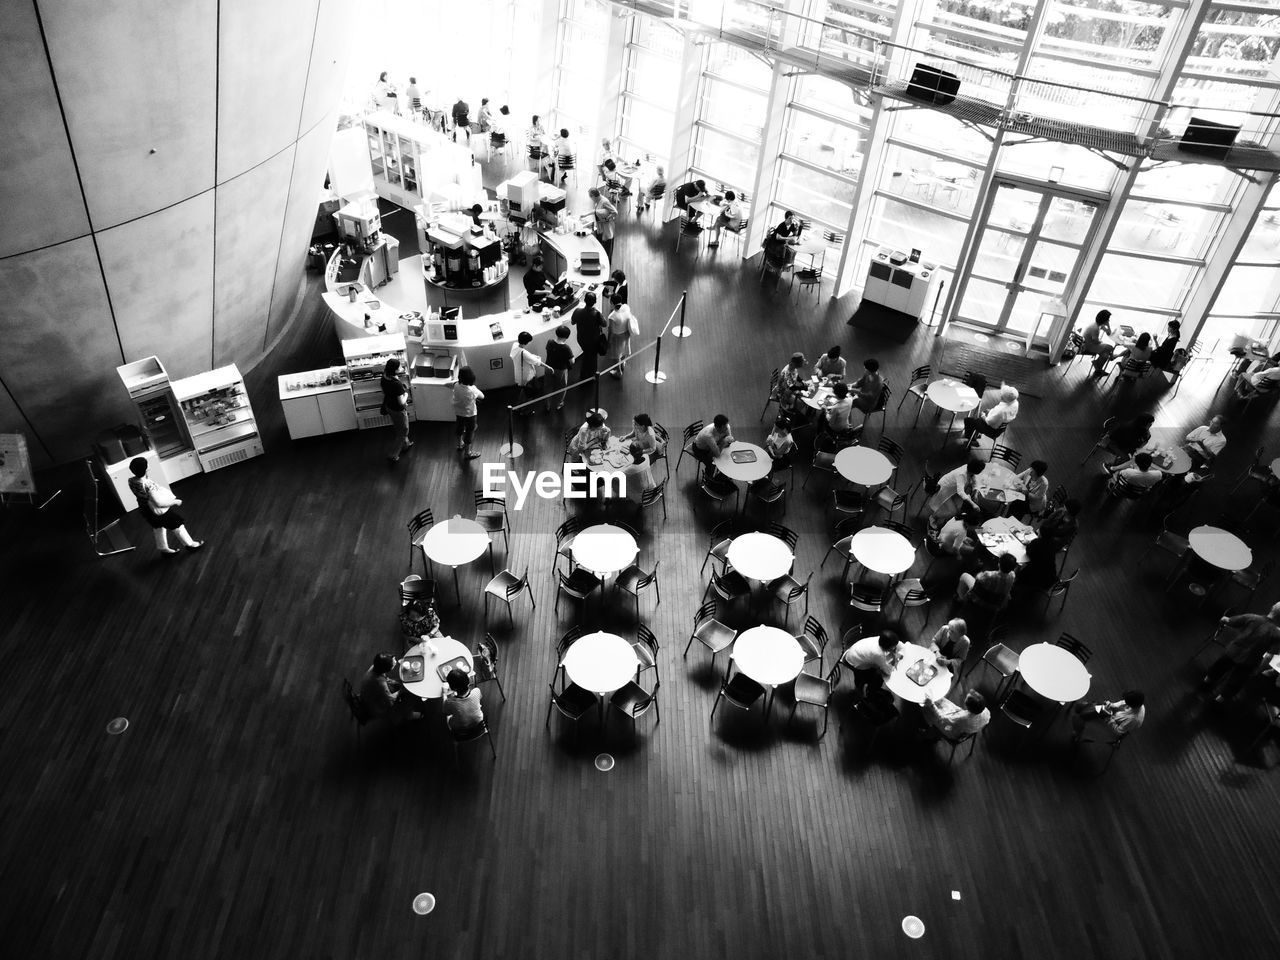 High angle view of people in restaurant